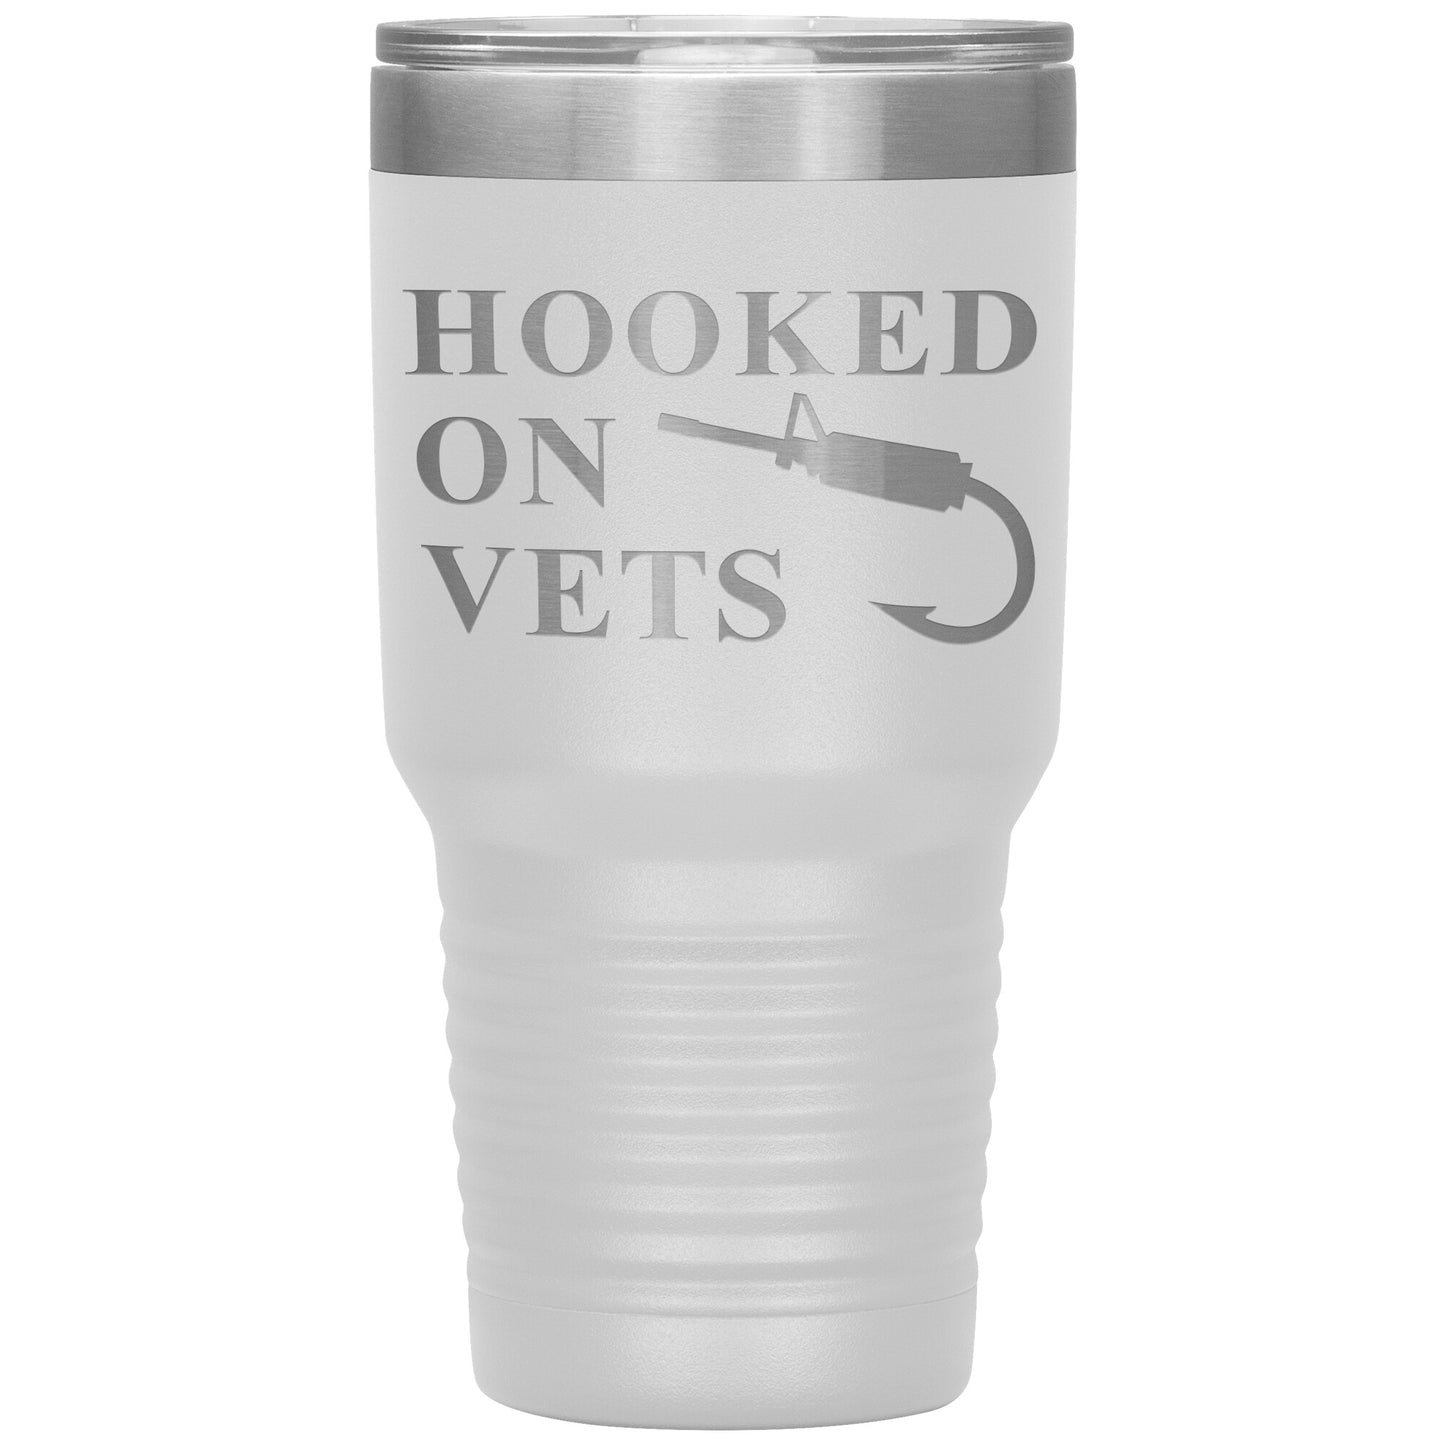 HOOKED ON VETS - 30oz Insulated Tumbler